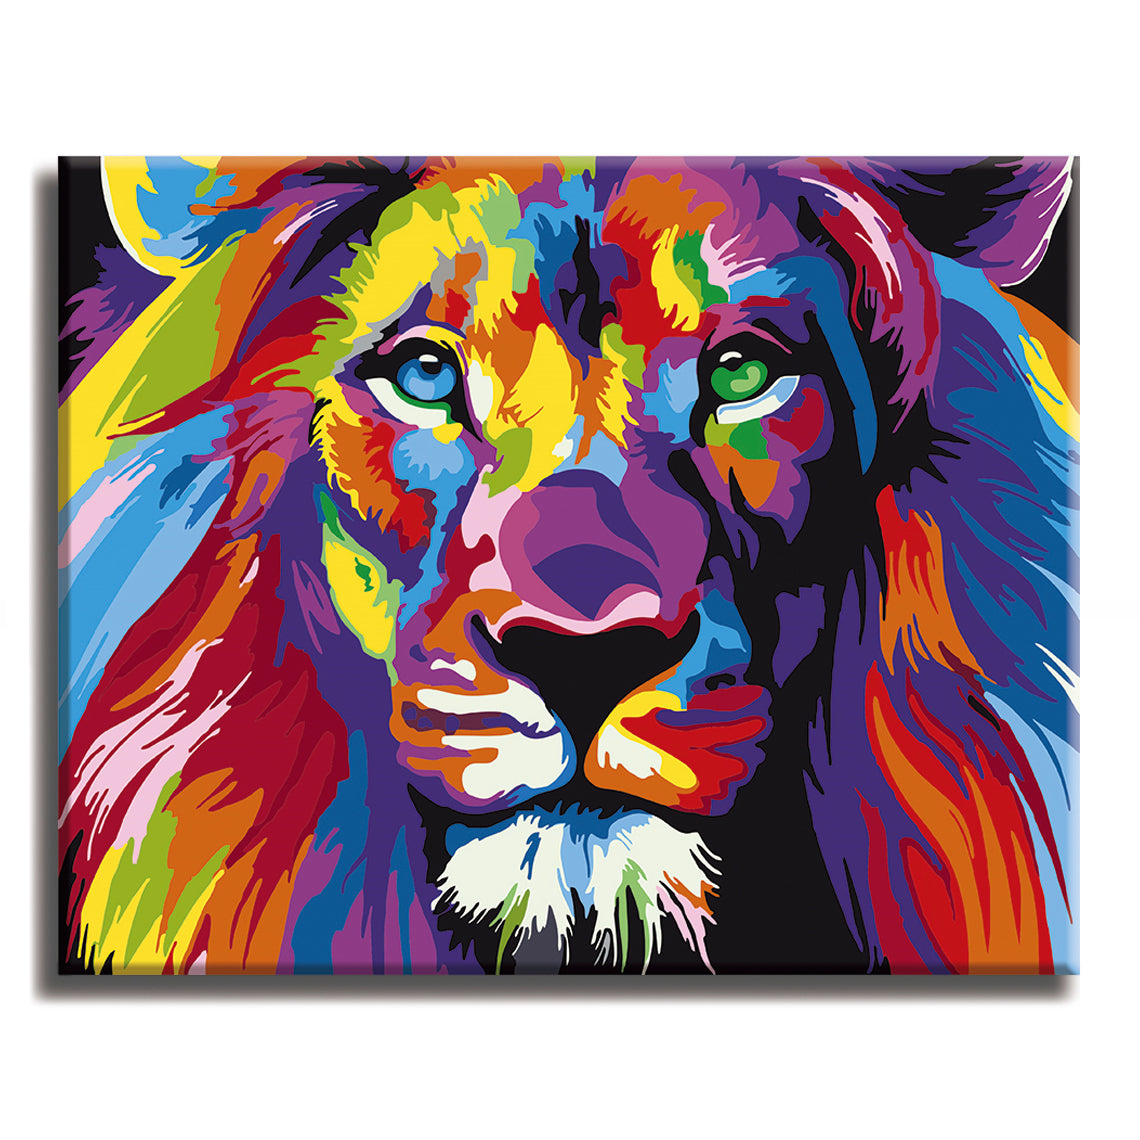 Colorful Lion - Paint by Numbers Kit for Adults DIY Oil Painting